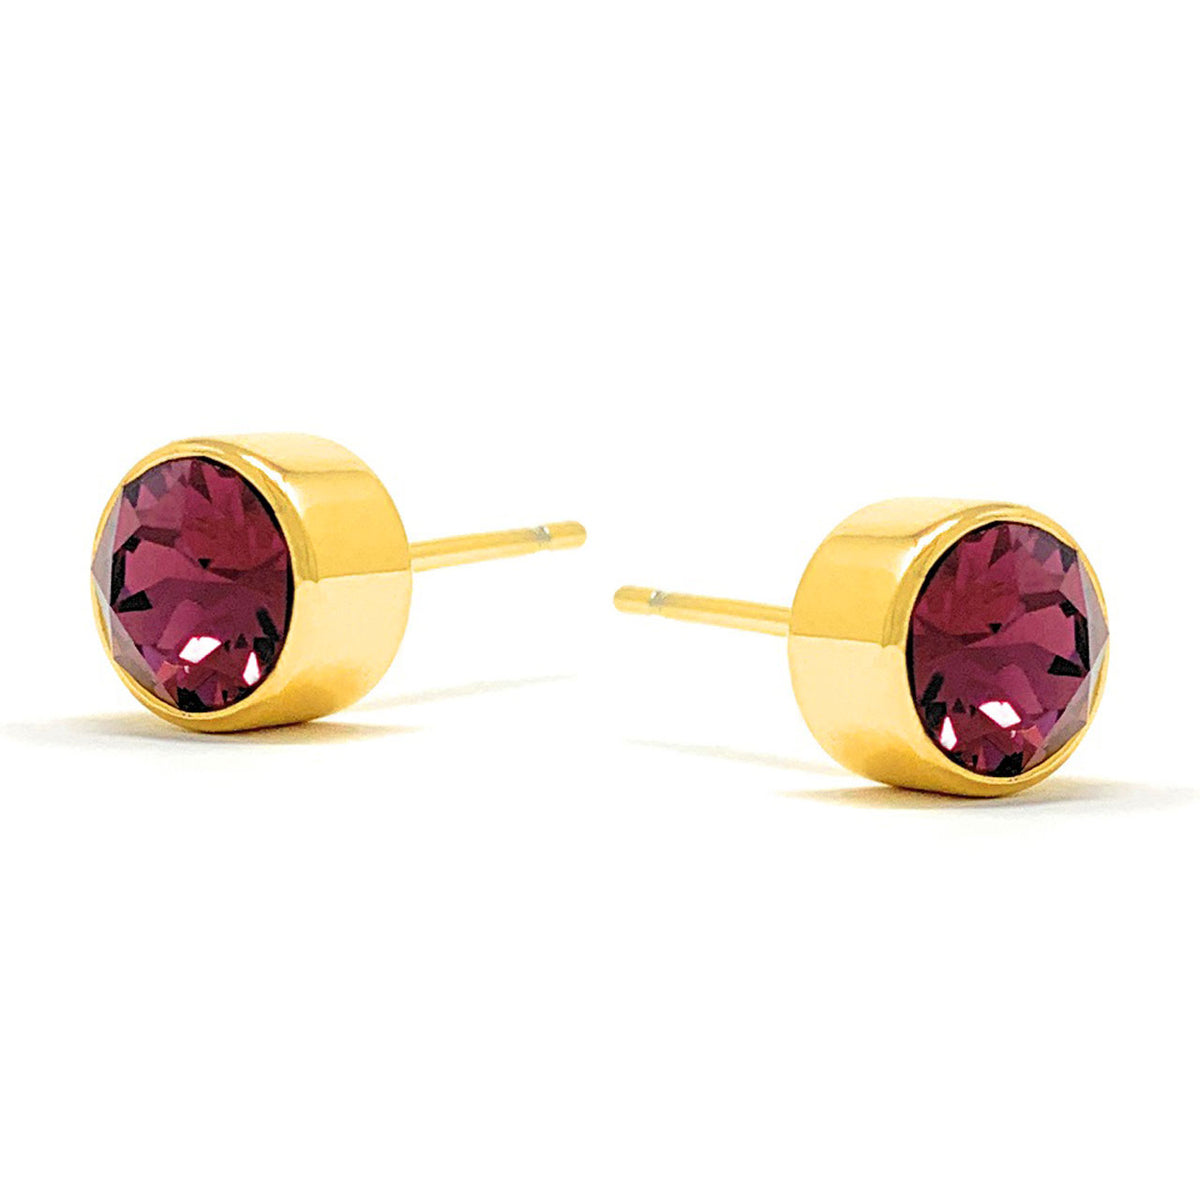 Harley Small Stud Earrings with Purple Amethyst Round Crystals from Swarovski Gold Plated - Ed Heart